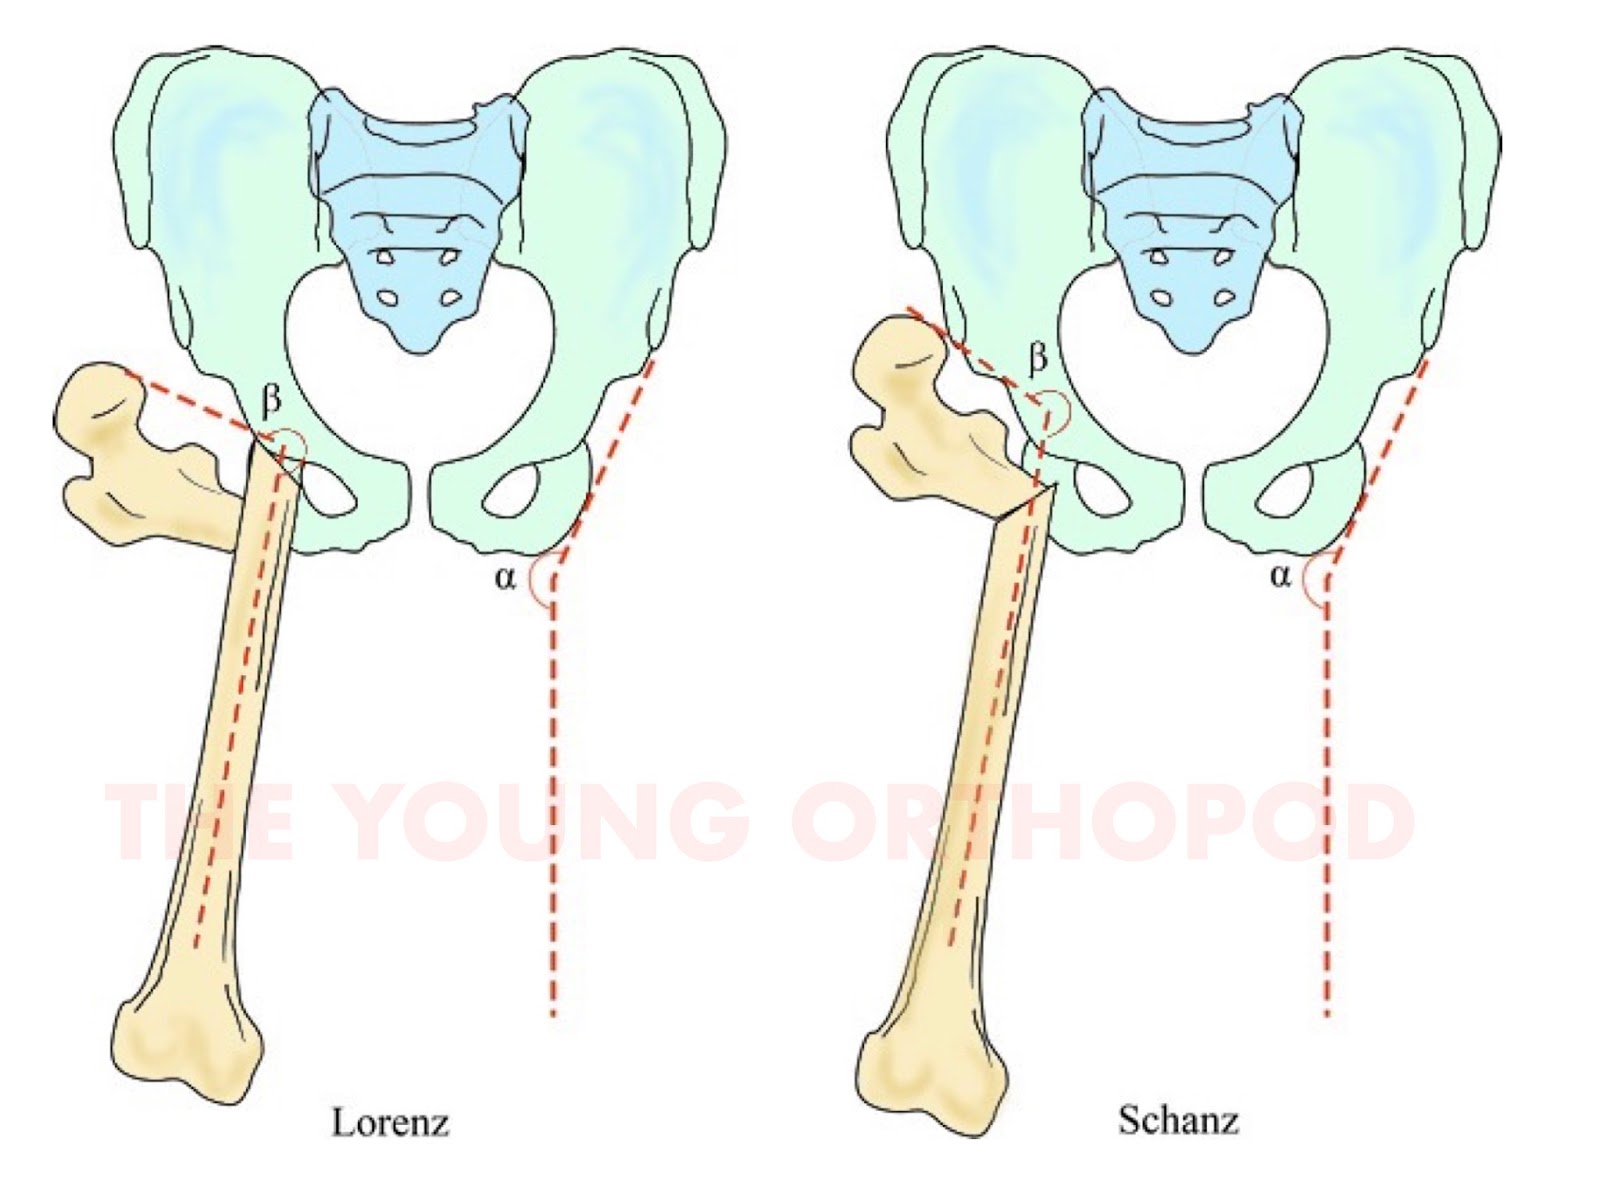 Both Lorenz and Schanz osteotomies provide 'pelvic support'. Milch